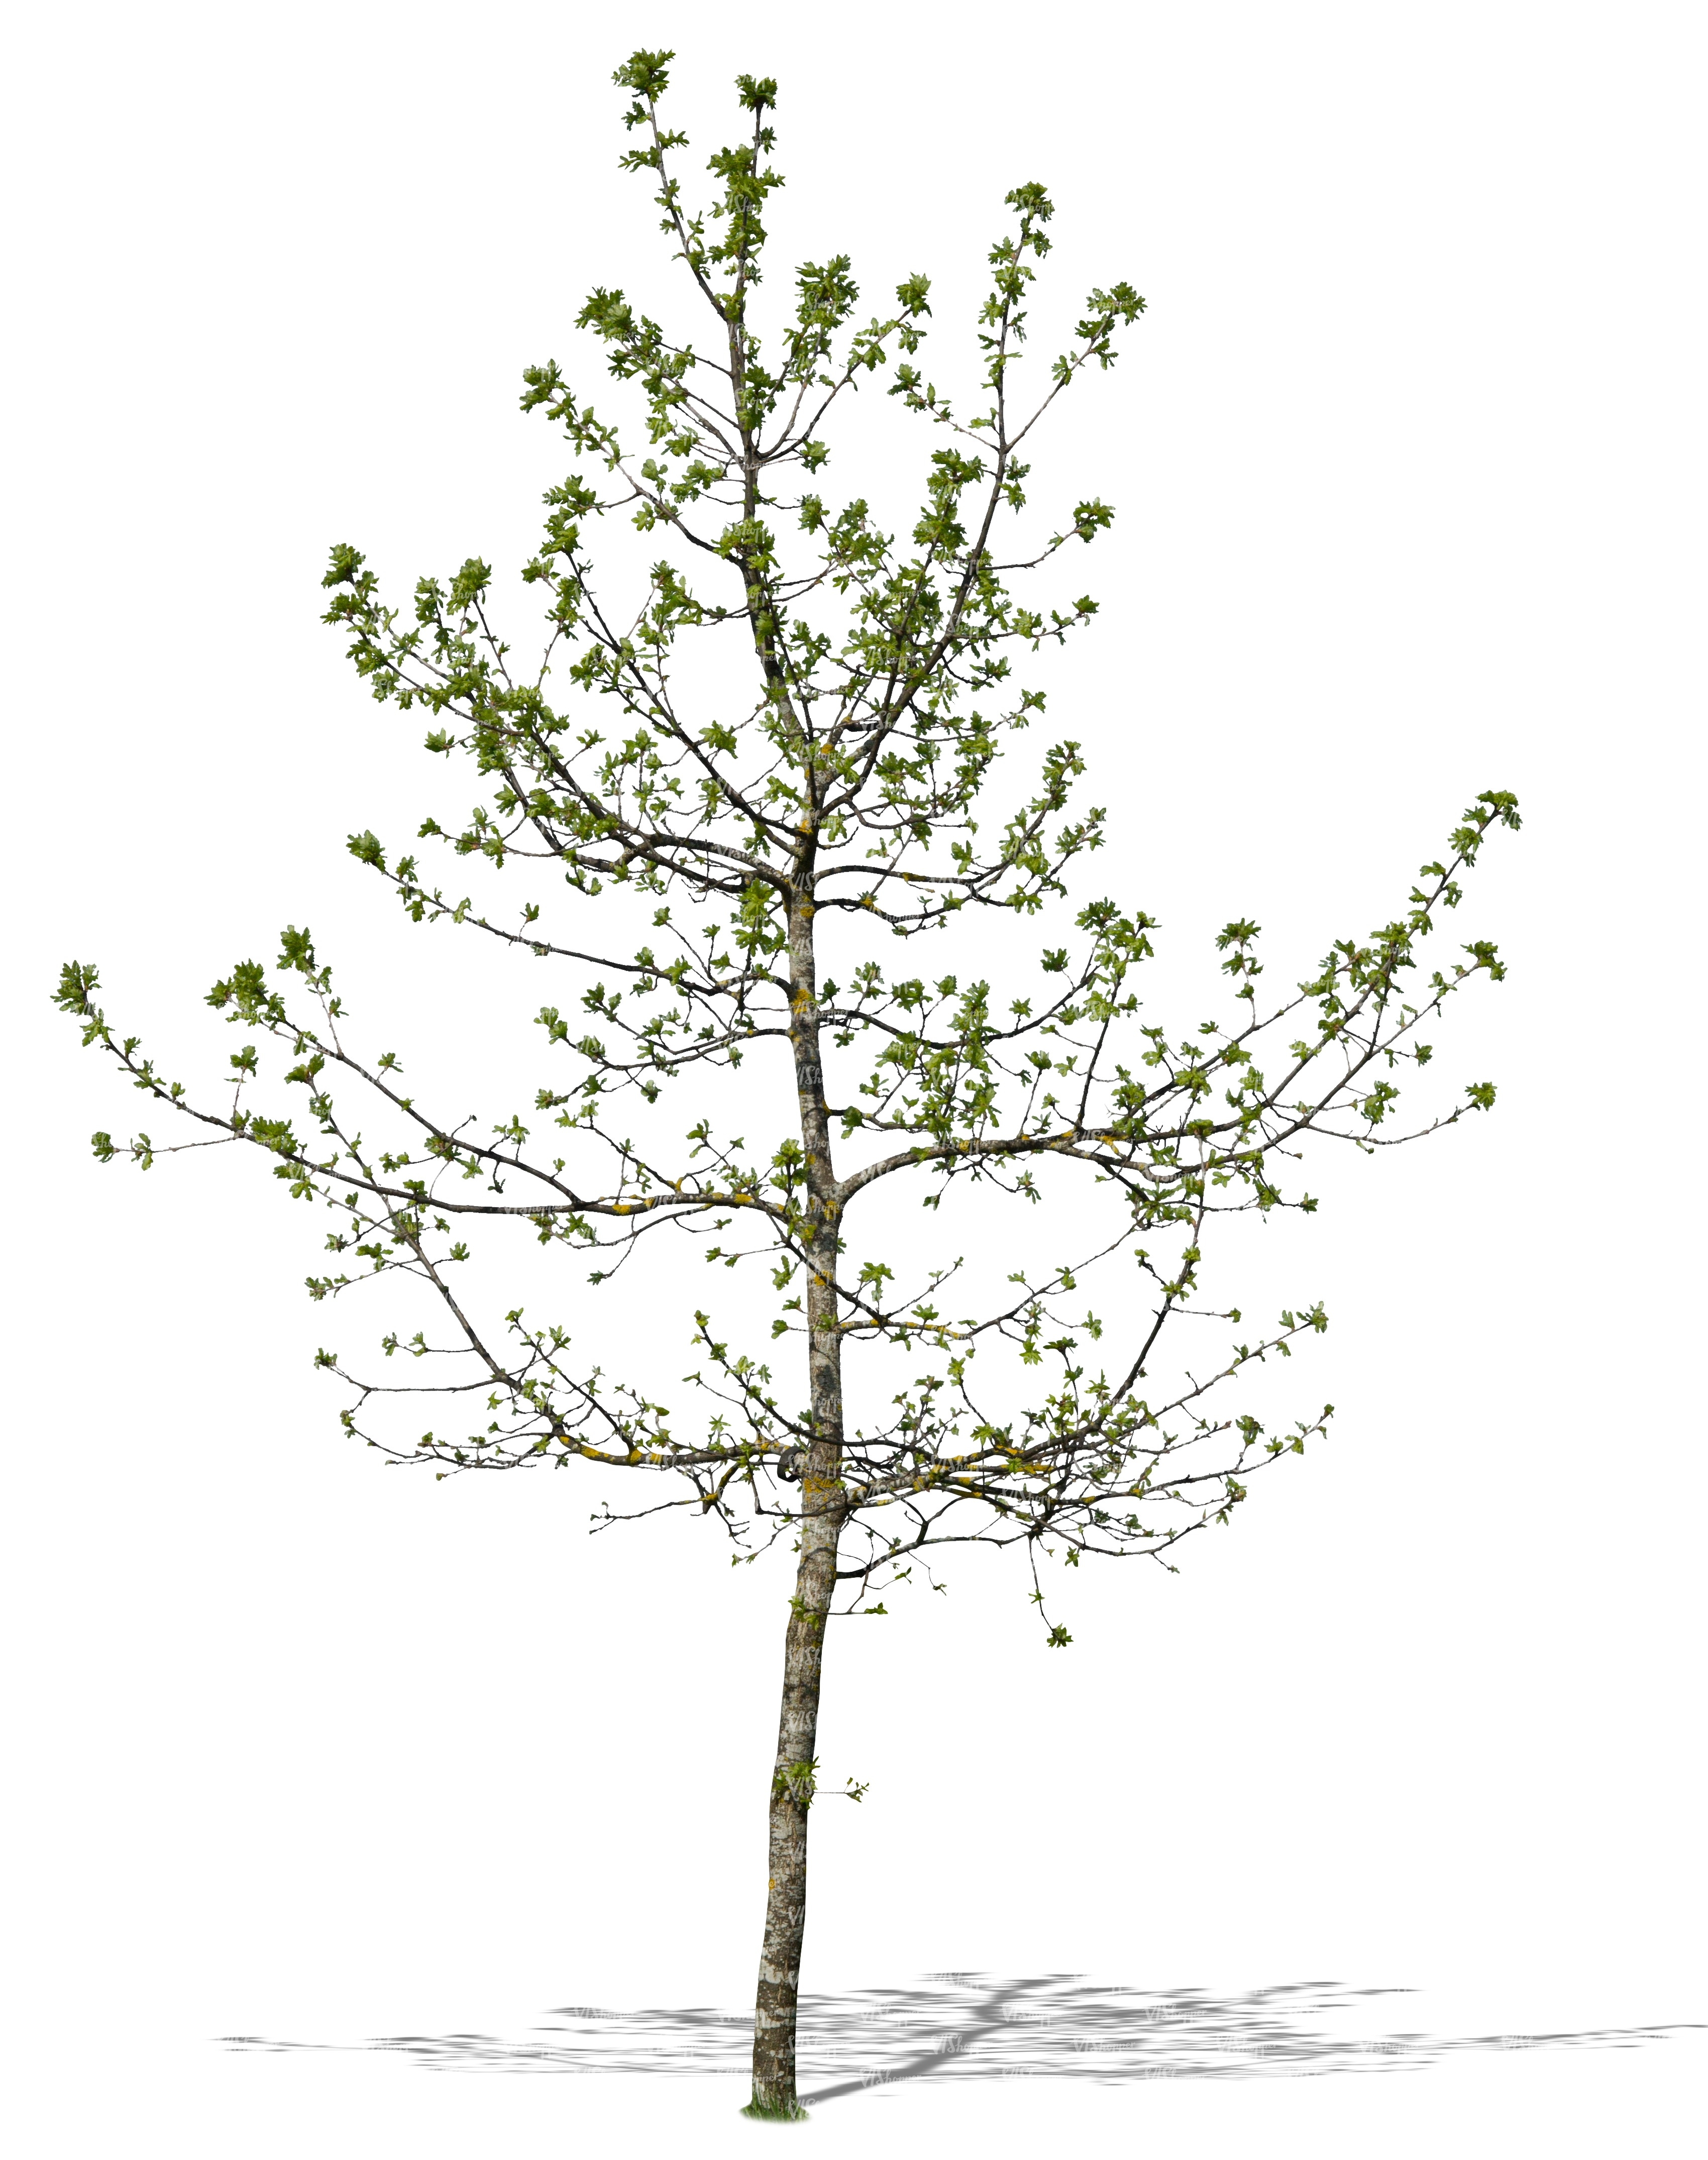 small tree with sprouts - cut out trees and plants - VIShopper